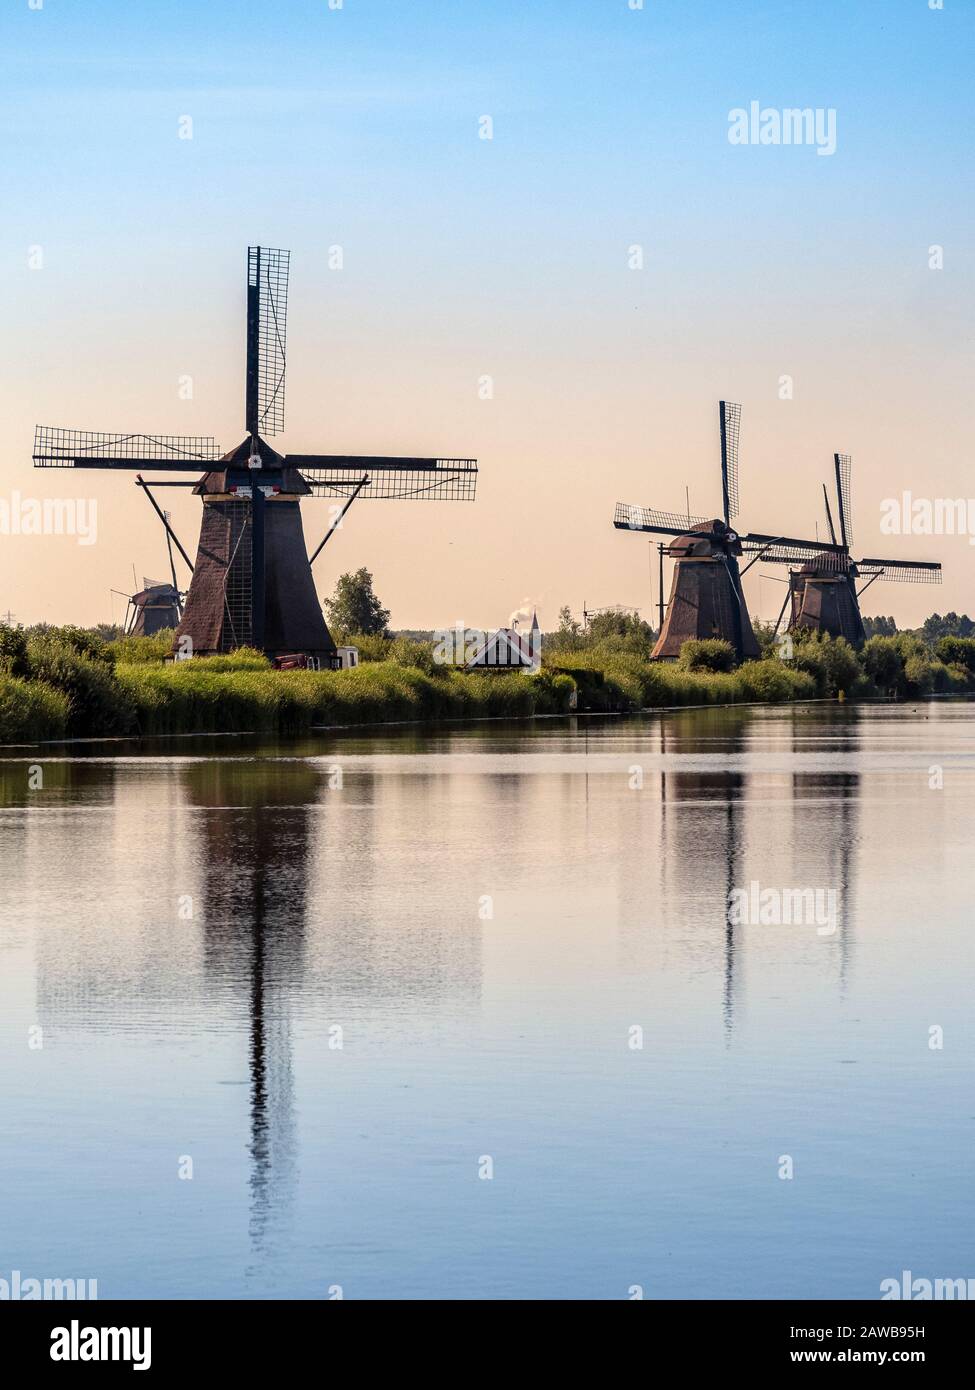 NETHERLANDS - JULY 04, 2019: The historic 17th Century windmills at Kinderdijk in early morning light with reflection in a canal Stock Photo